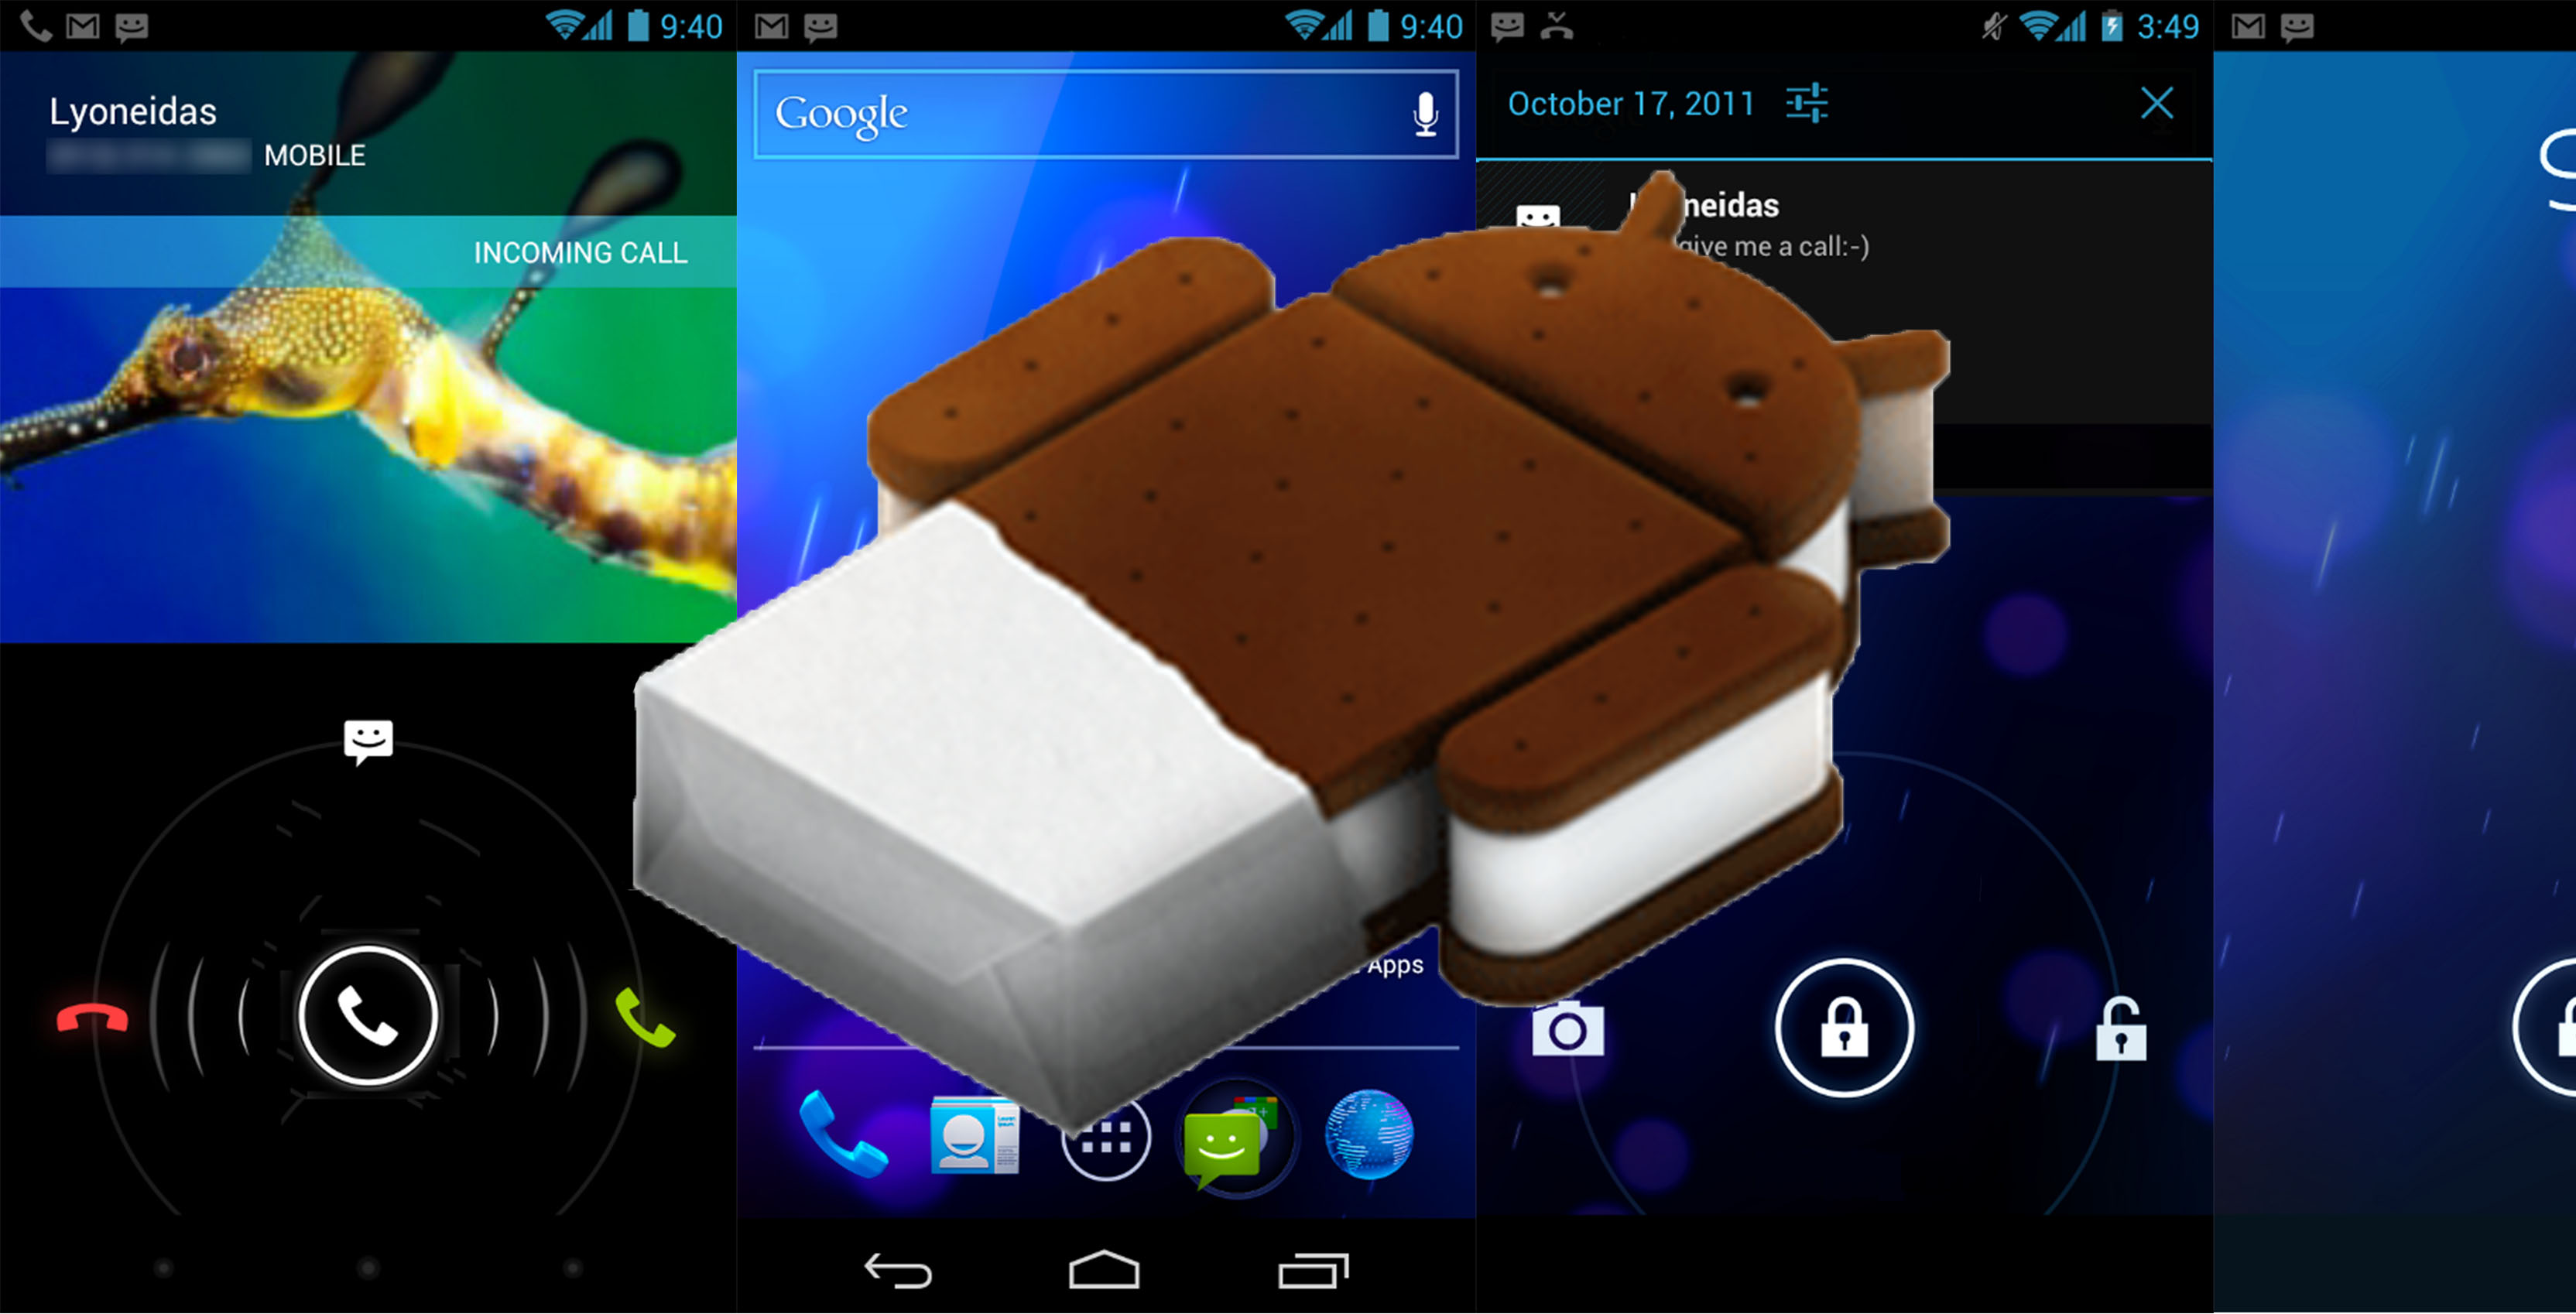 android 4.0 ice cream sandwich update download